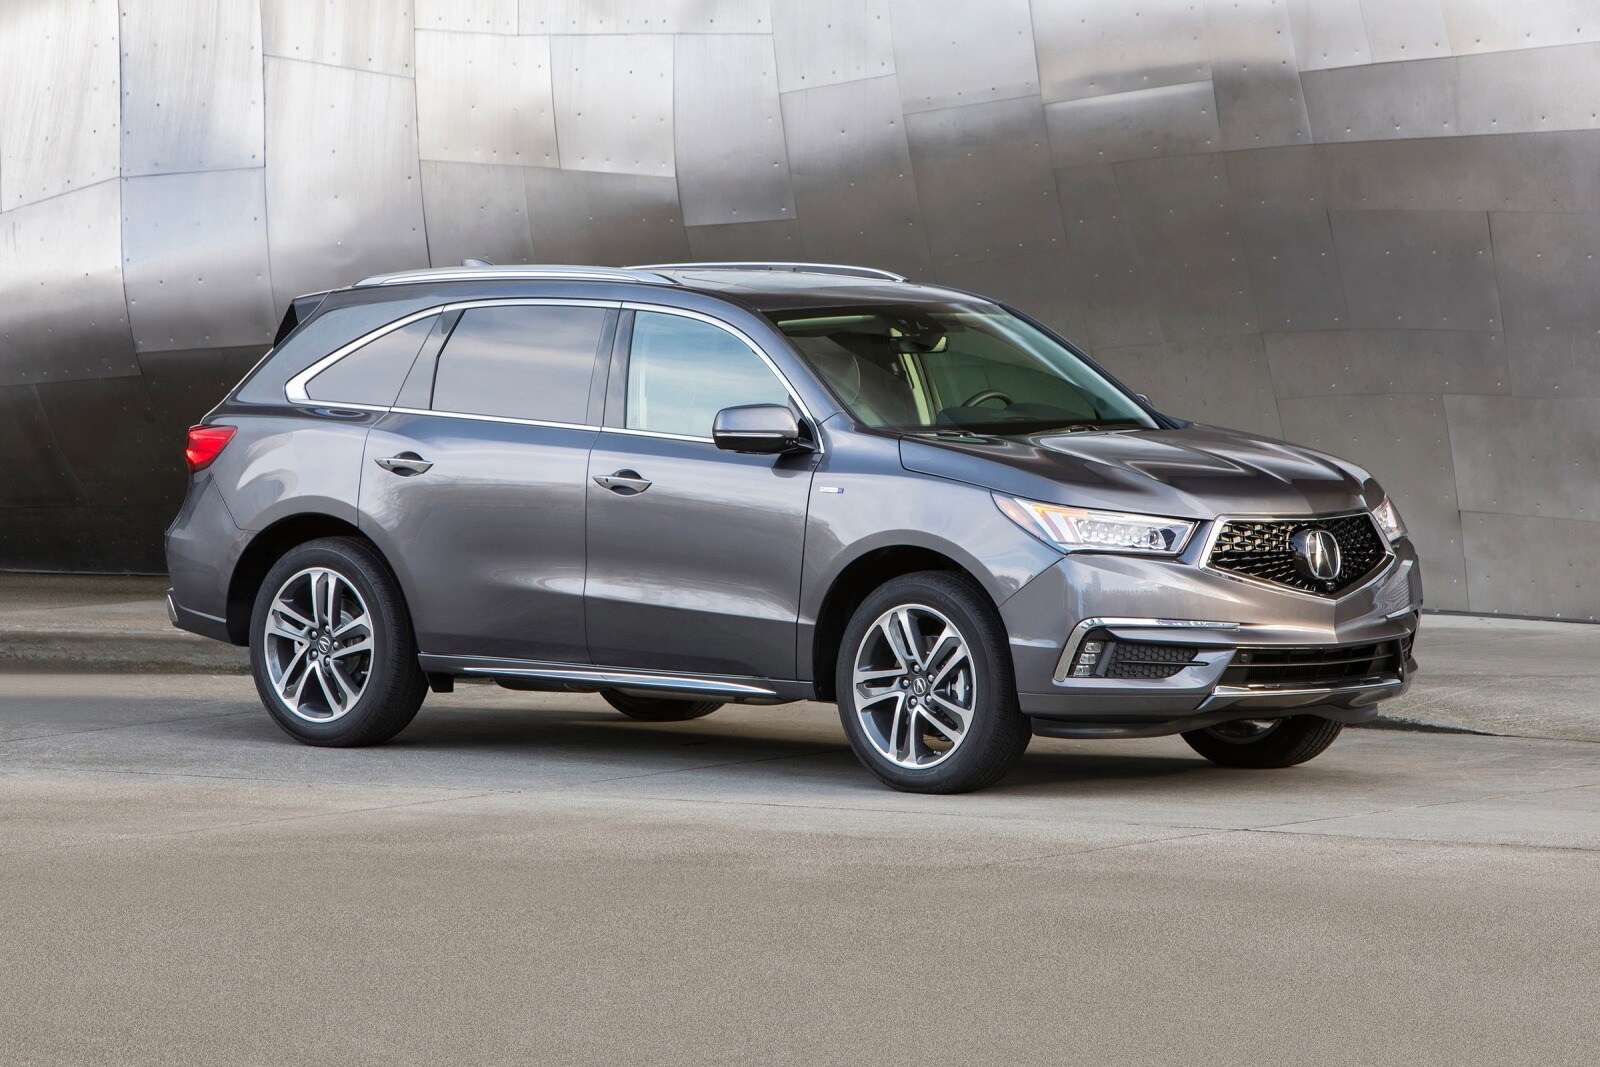 Used 2017 Acura MDX Hybrid Review | Edmunds